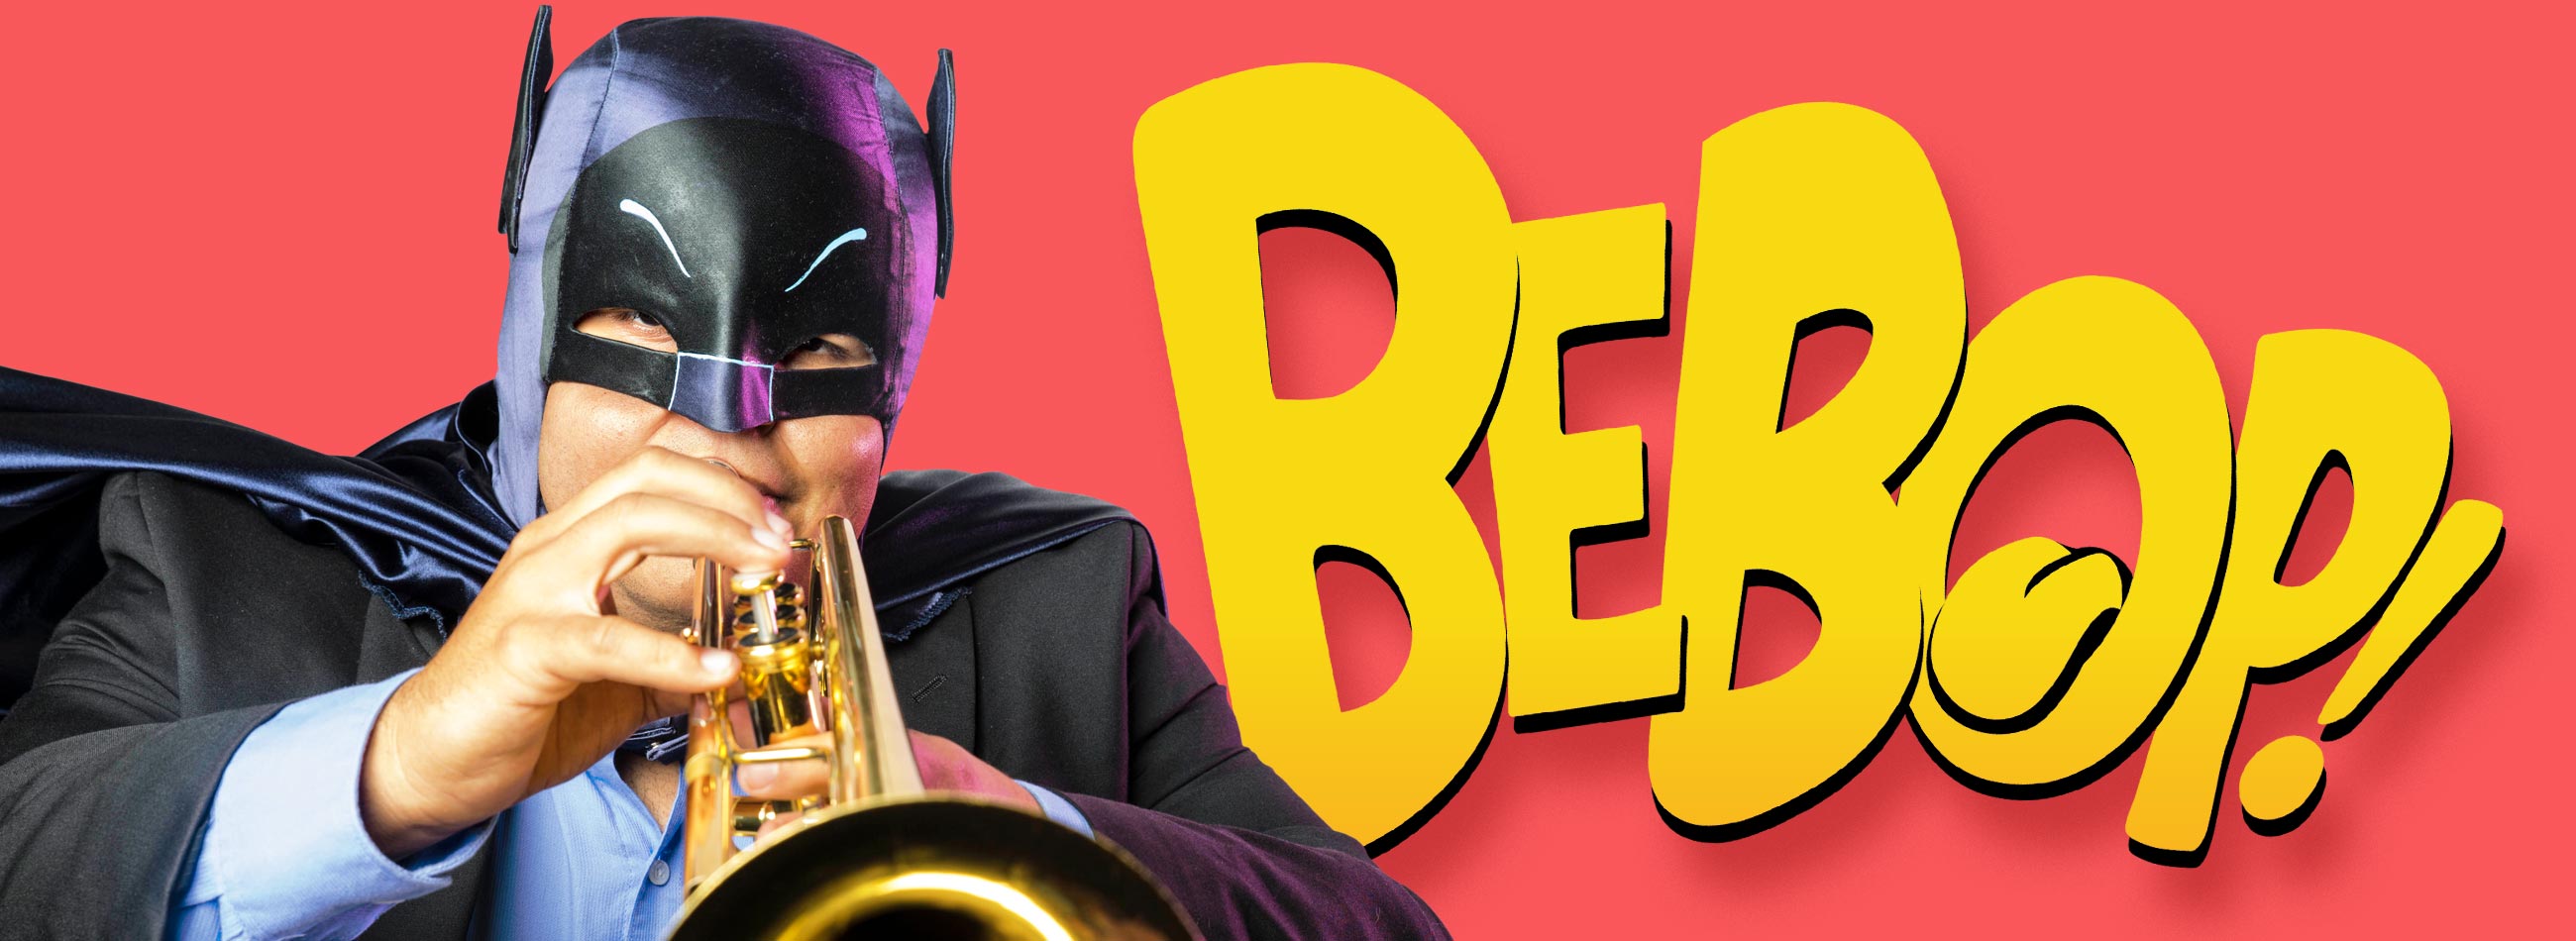 Trumpet player in Batman mask and cape appears with BEBOP! text